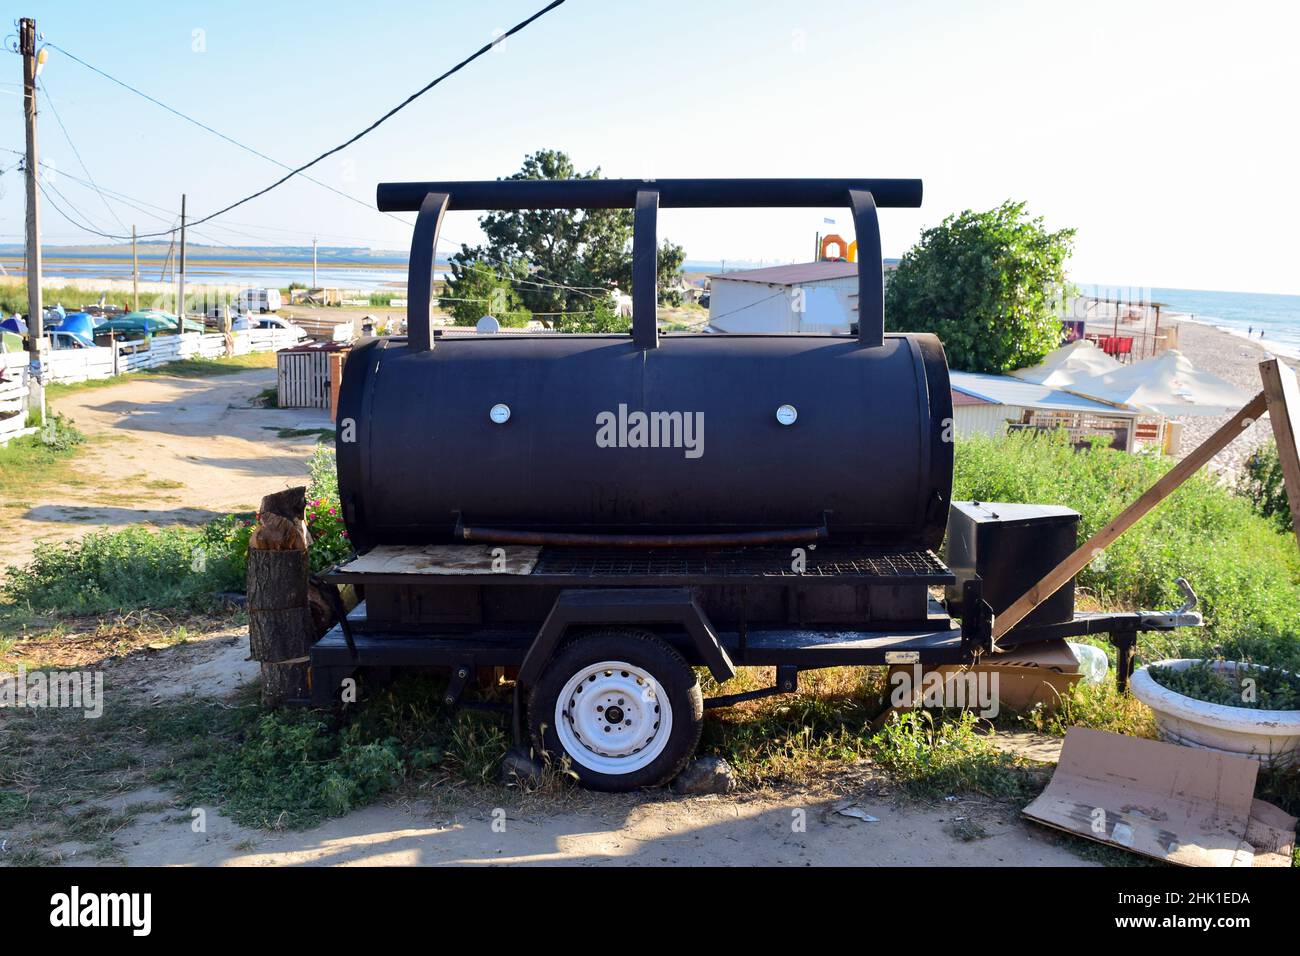 Barbecue With Wheels High Resolution Stock Photography and Images - Alamy